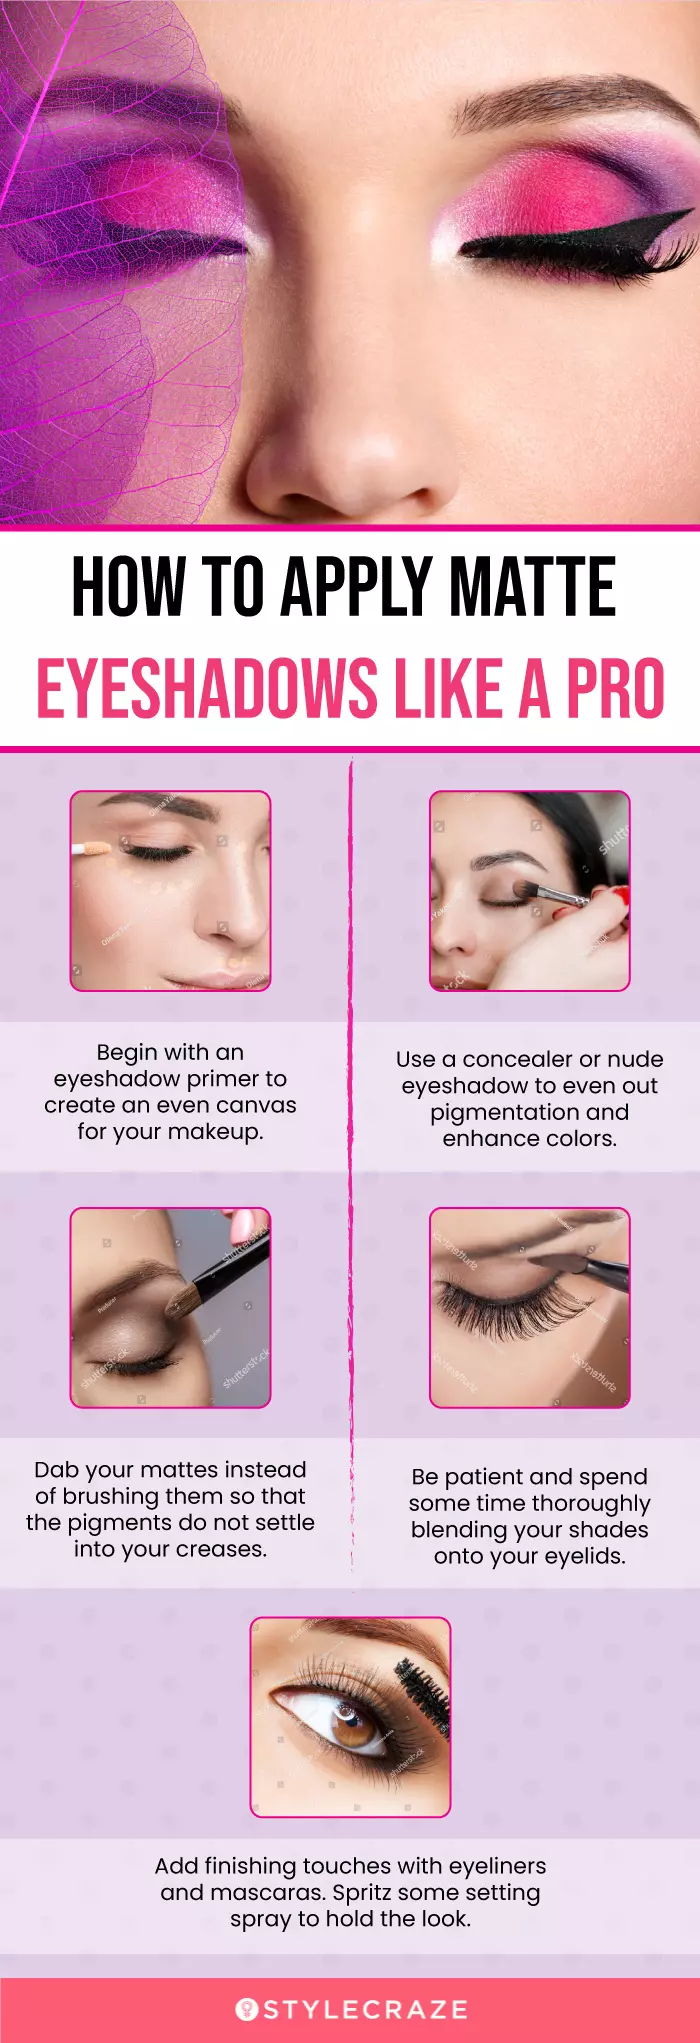 How To Apply Matte Eyeshadows Like A Pro (infographic)